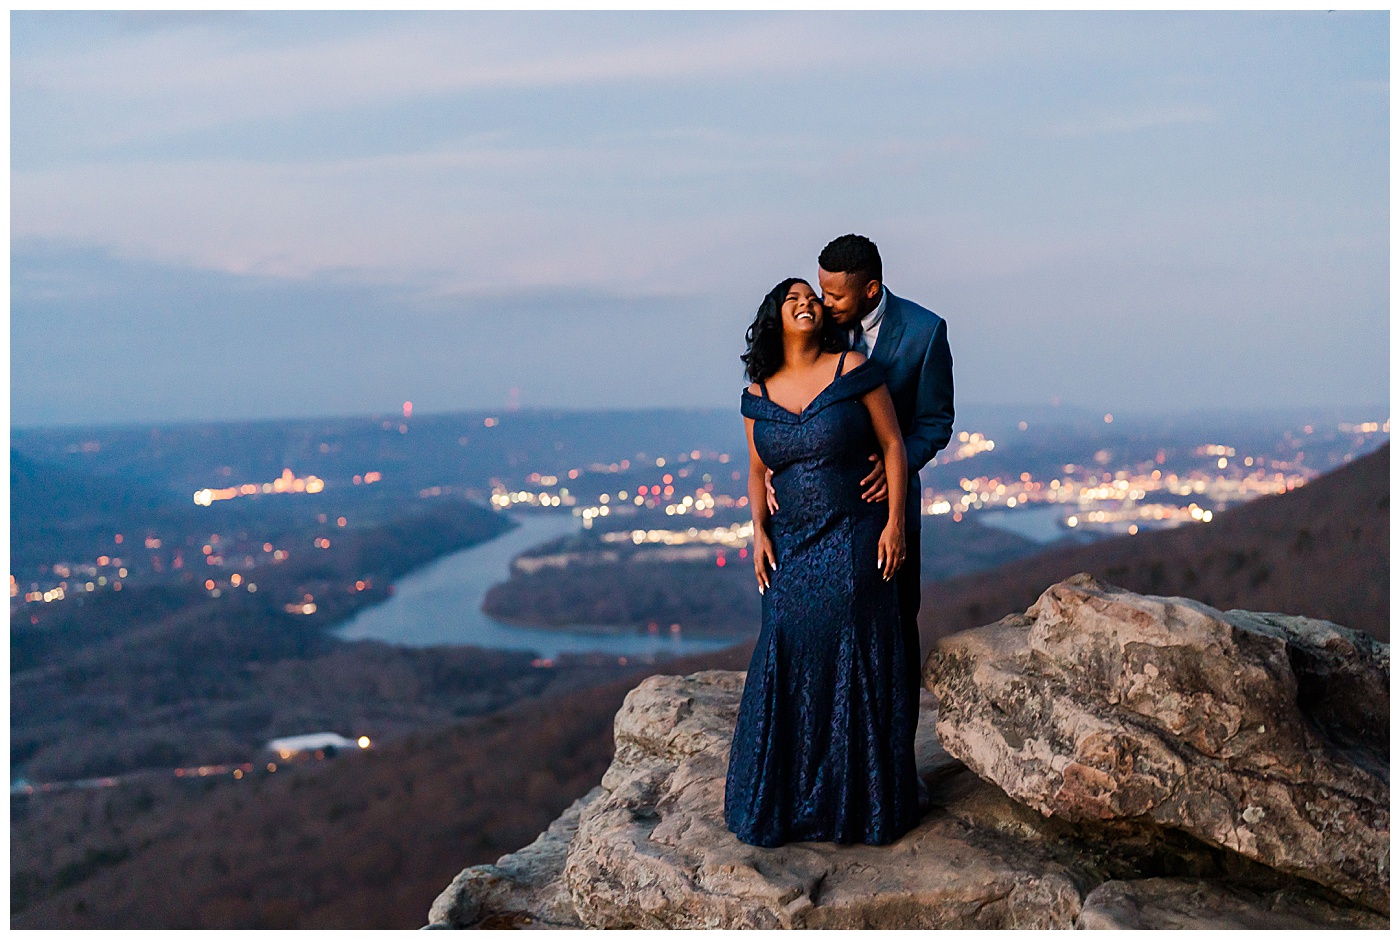 Lookout Mountain Sunset Laughing Couple Romantic